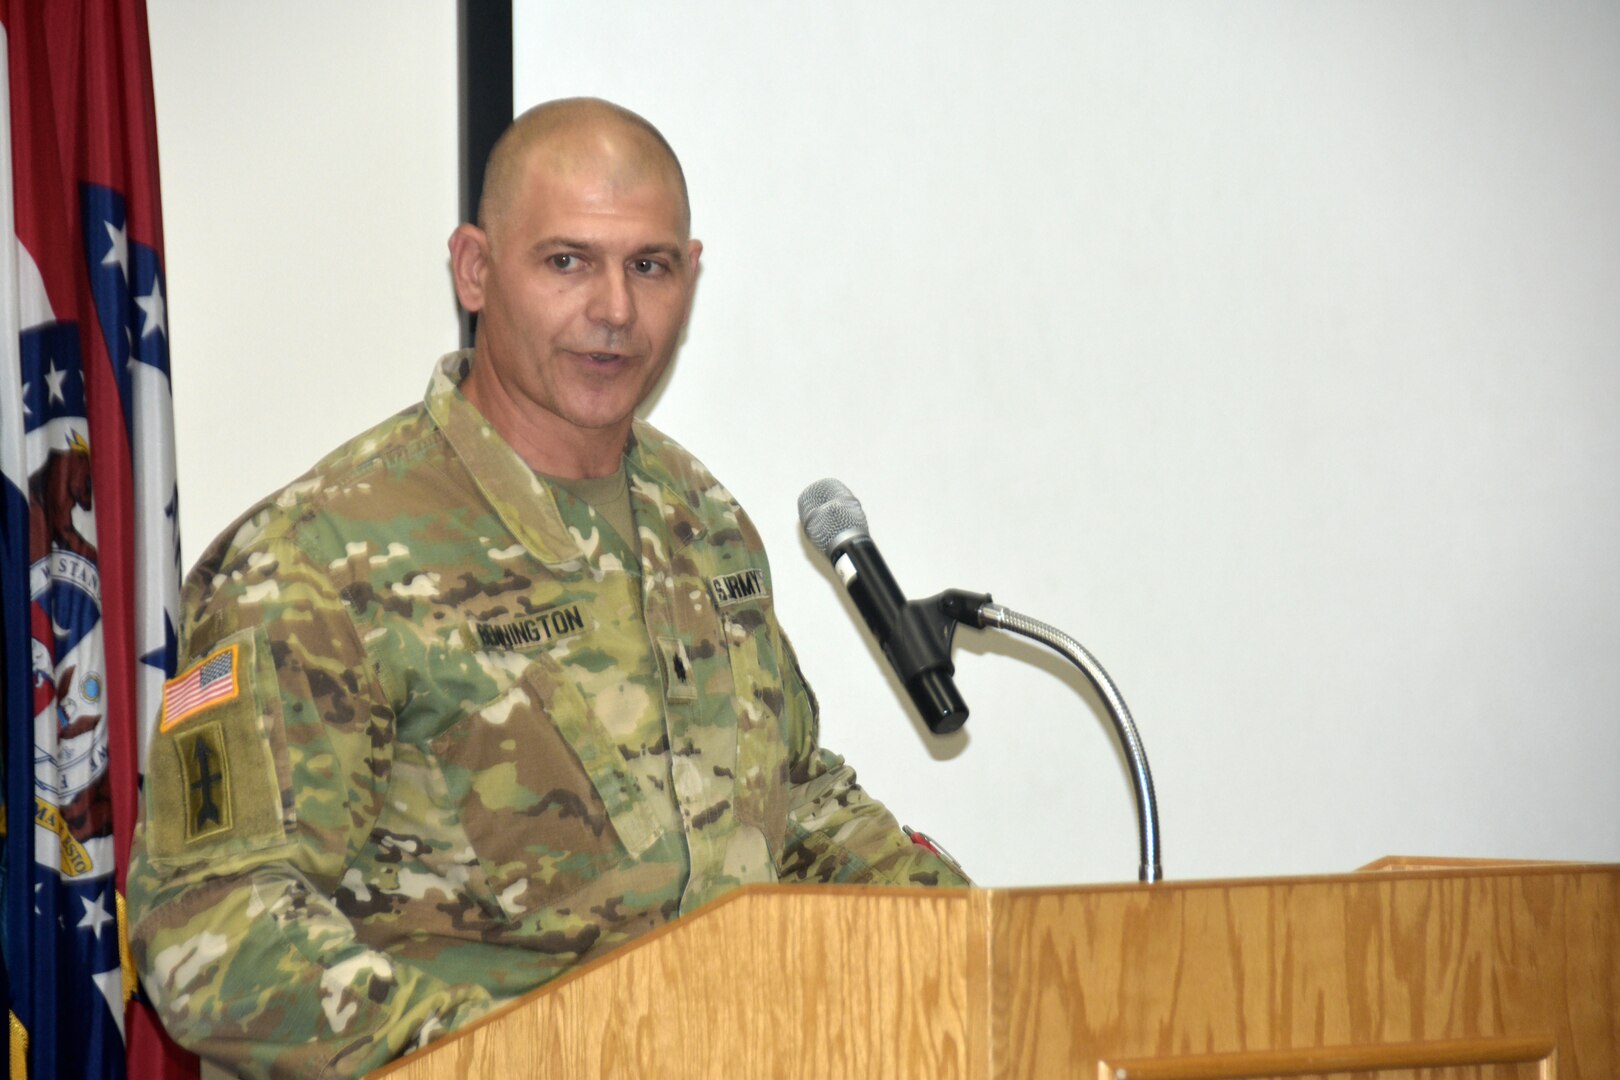 Lt. Col. Nathan Bennington speaks during a formal change of command ceremony Oct. 14 at the Wisconsin Military Academy, Fort McCoy, Wis.